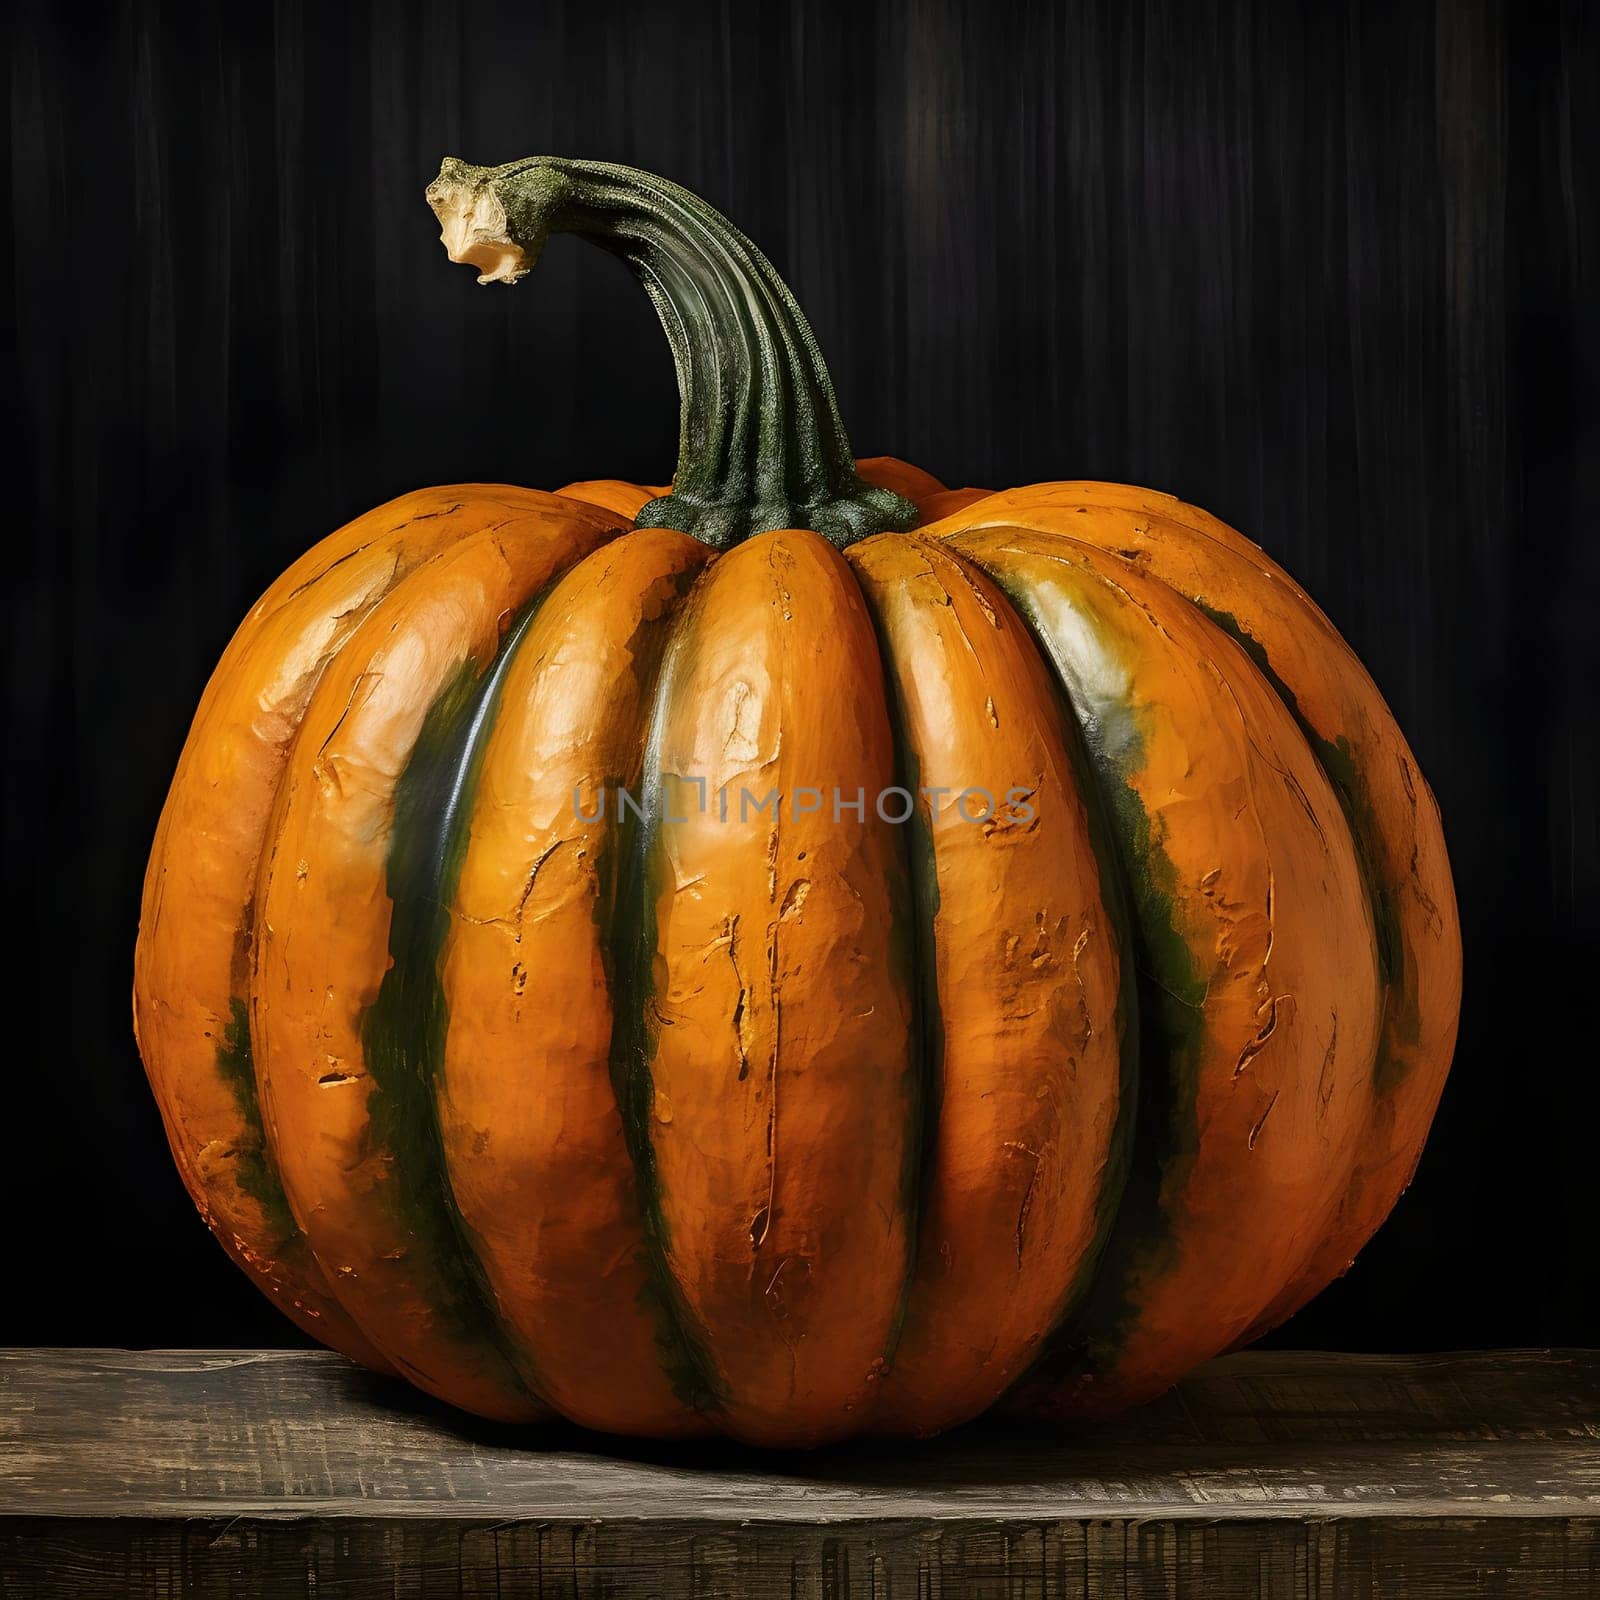 Painted with paint, watercolor pumpkin on a dark background. Pumpkin as a dish of thanksgiving for the harvest. by ThemesS